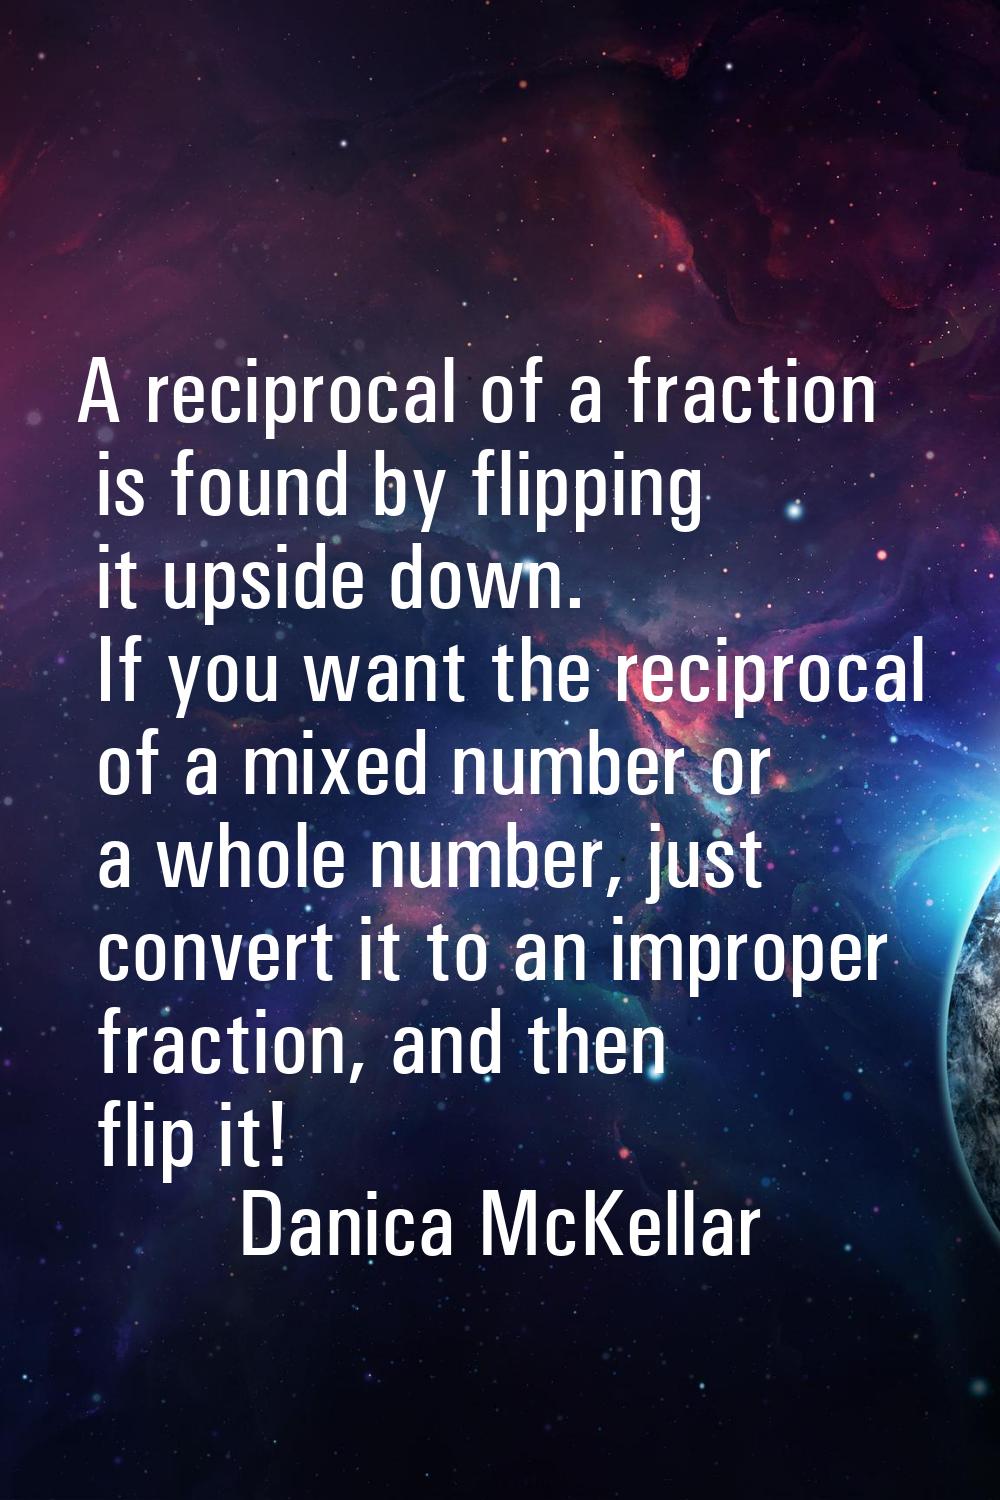 A reciprocal of a fraction is found by flipping it upside down. If you want the reciprocal of a mix